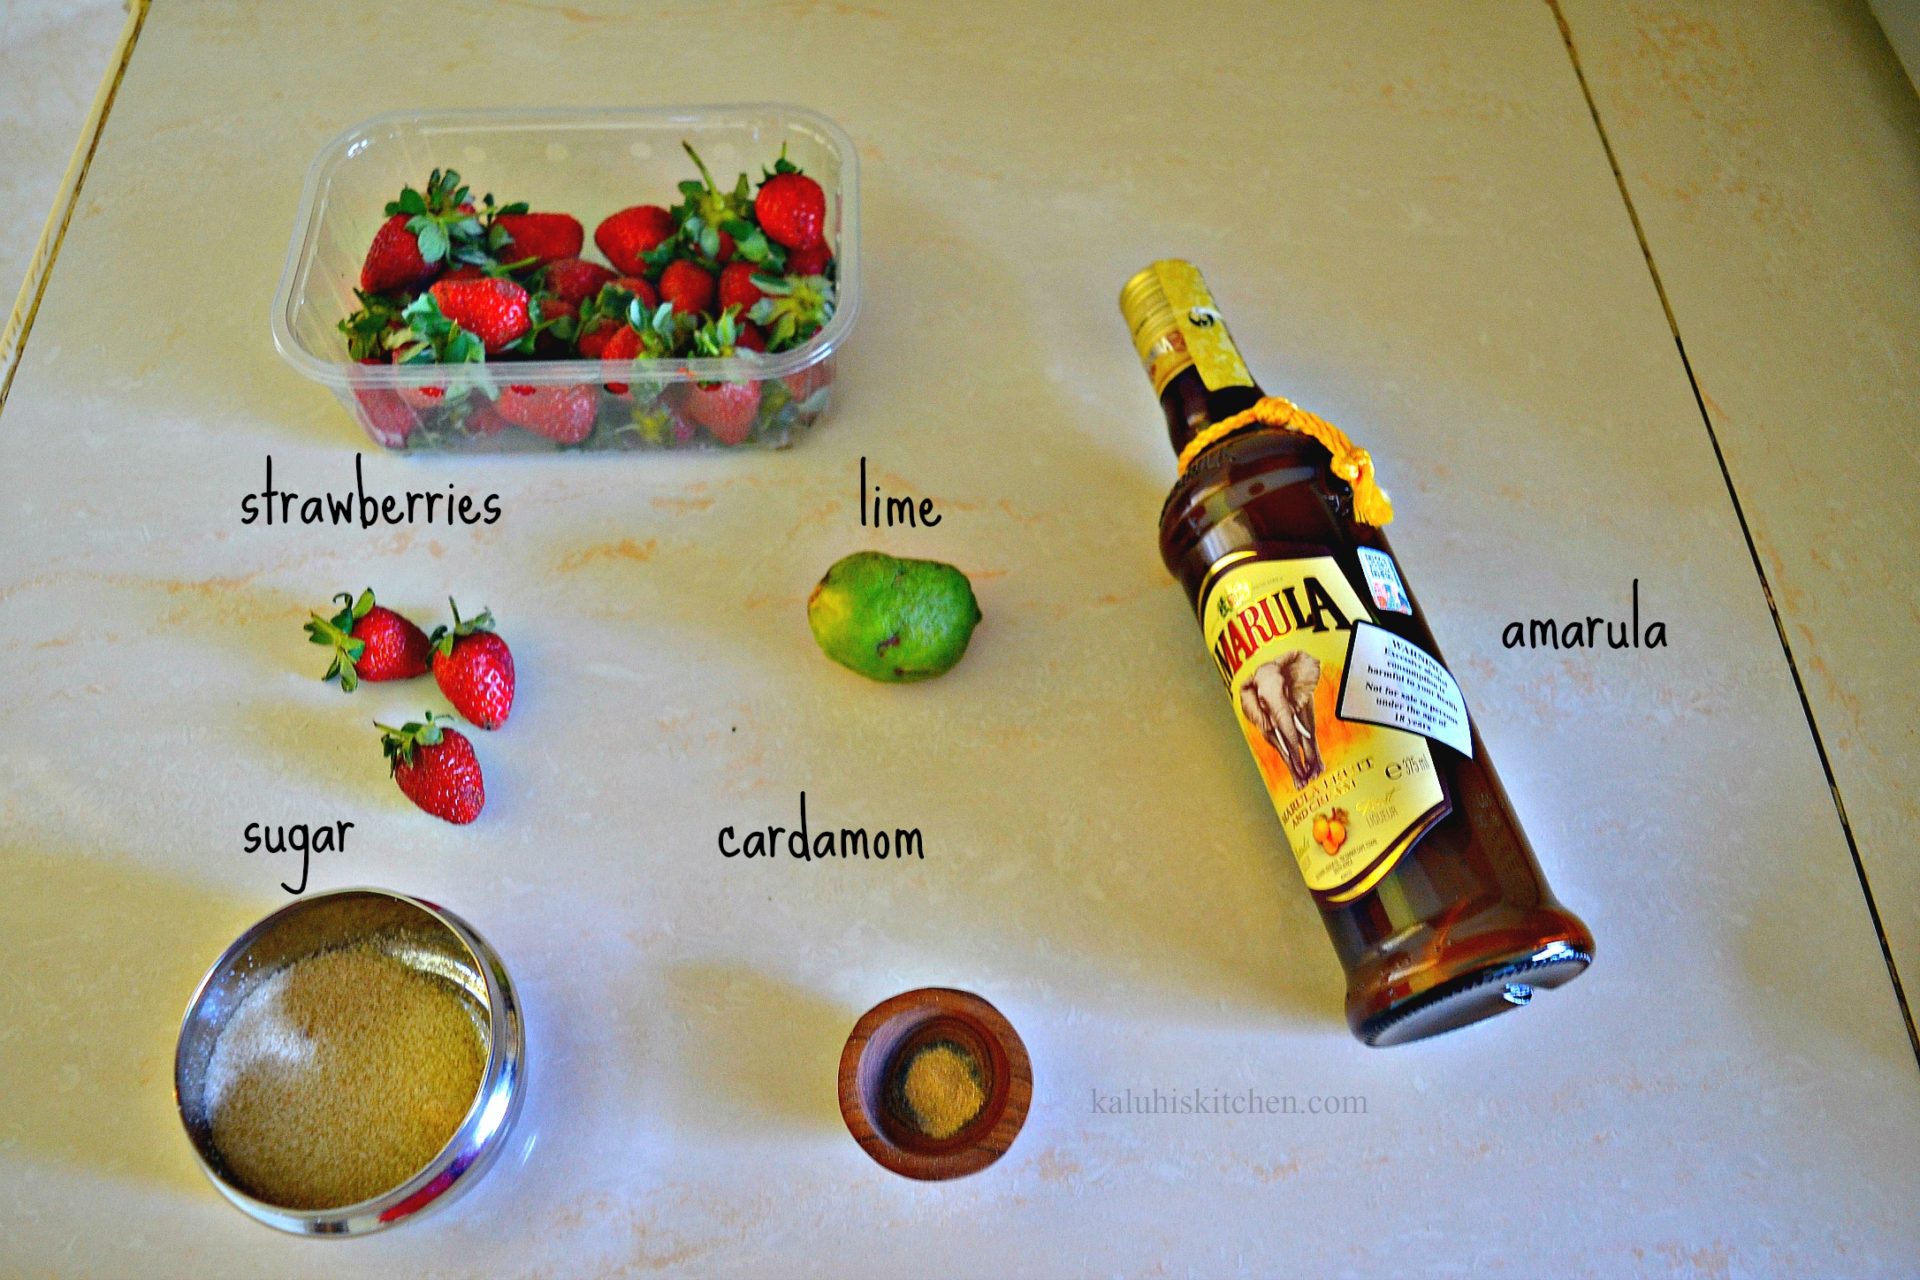 ingredients for macerated strawberries_how to make macerated strawberries_kaluhiskitchen.com